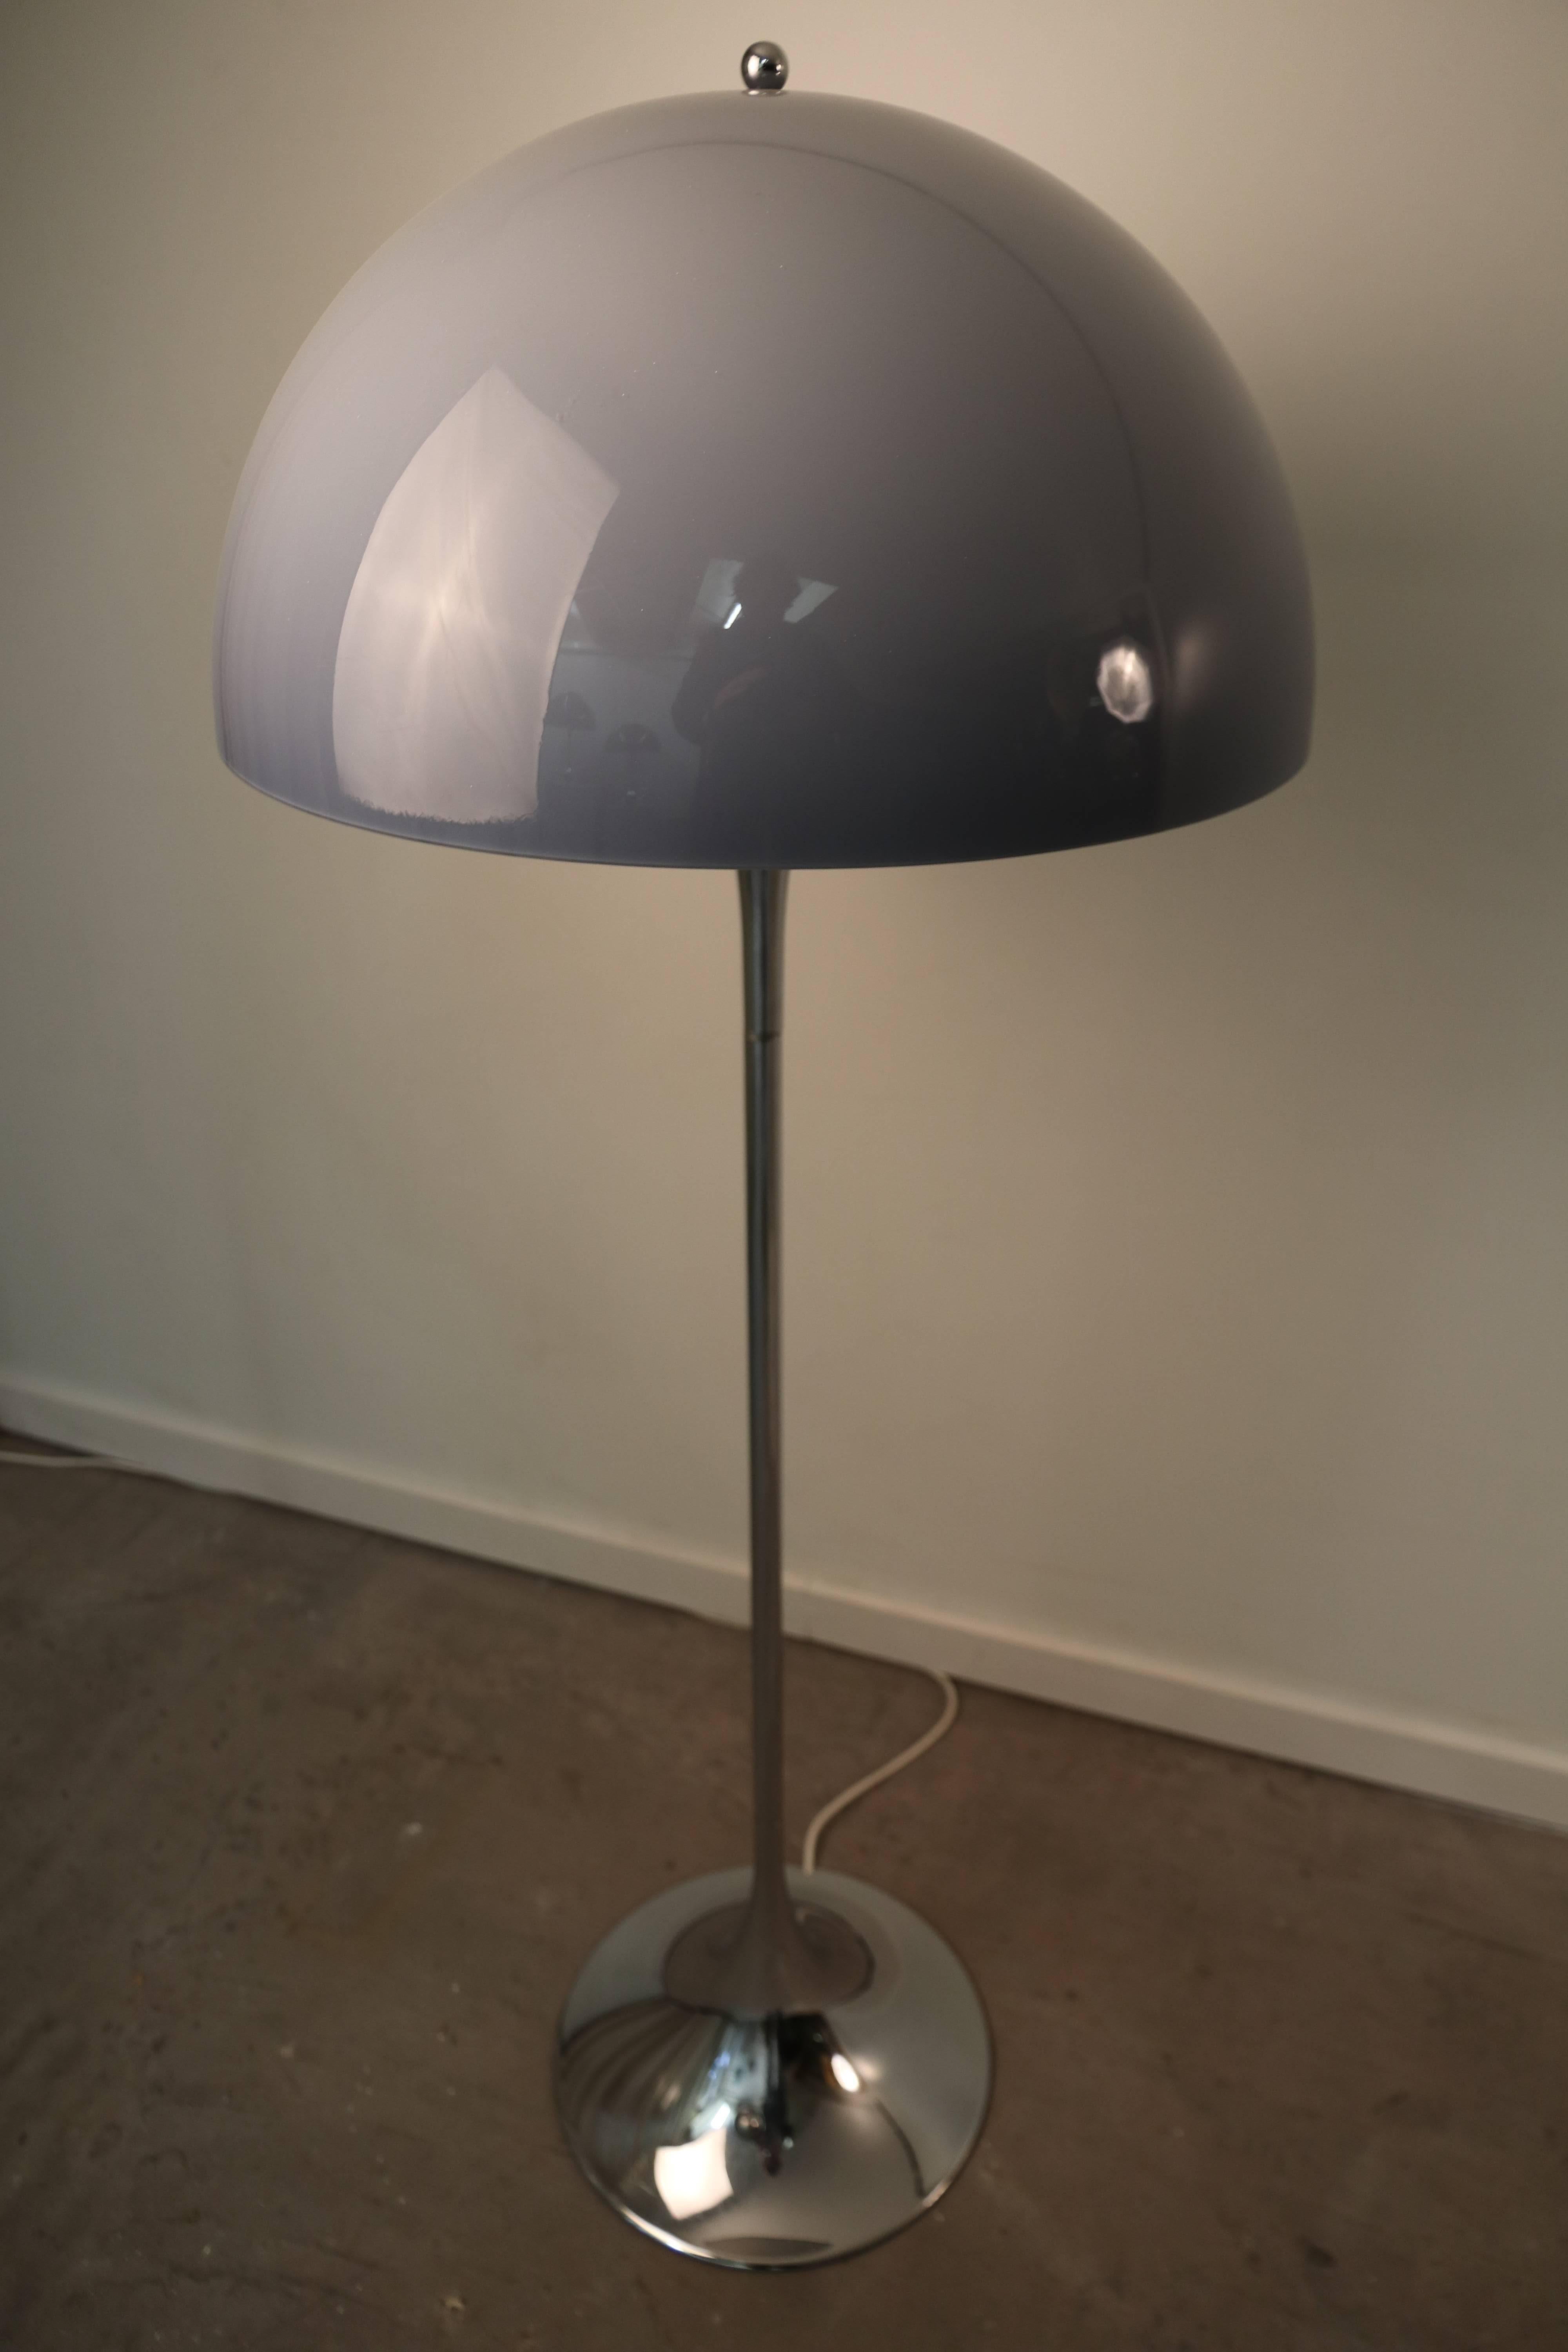 Beautiful first 1970s edition of the iconic Panthella floor lamp by Danish designer Verner Panton for manufacturer Louis Poulsen. The designer's inspiration is drawn from the mushroom- shaped atomic bomb clouds of WWII. The base of the light is